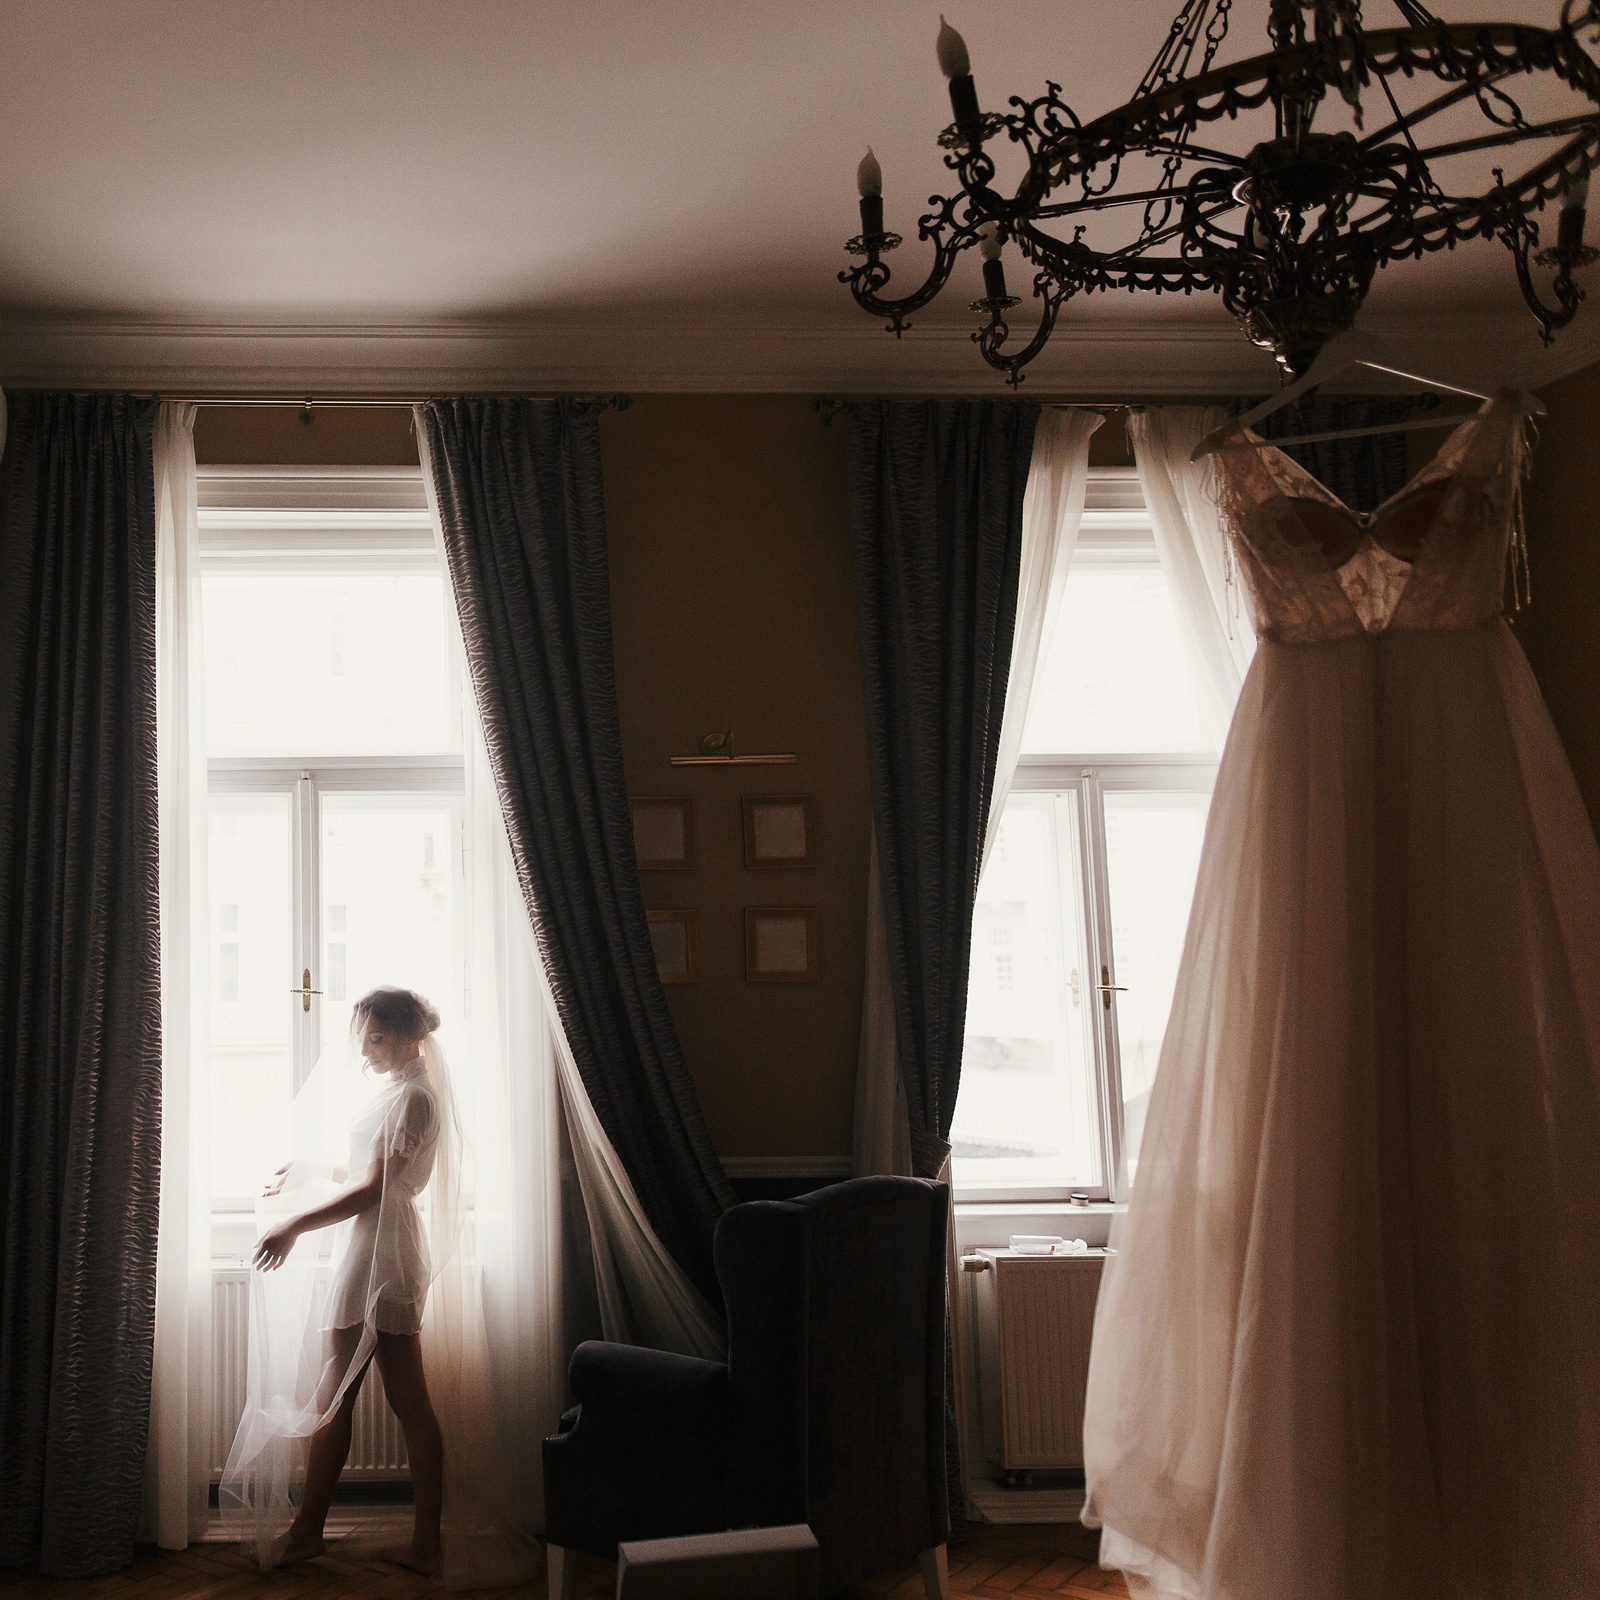 Gorgeous bride silhouette standing at window light, looking at stylish wedding dress, hanging on chandelier, in the morning. Bride and her beautiful wedding gown. Woman getting ready